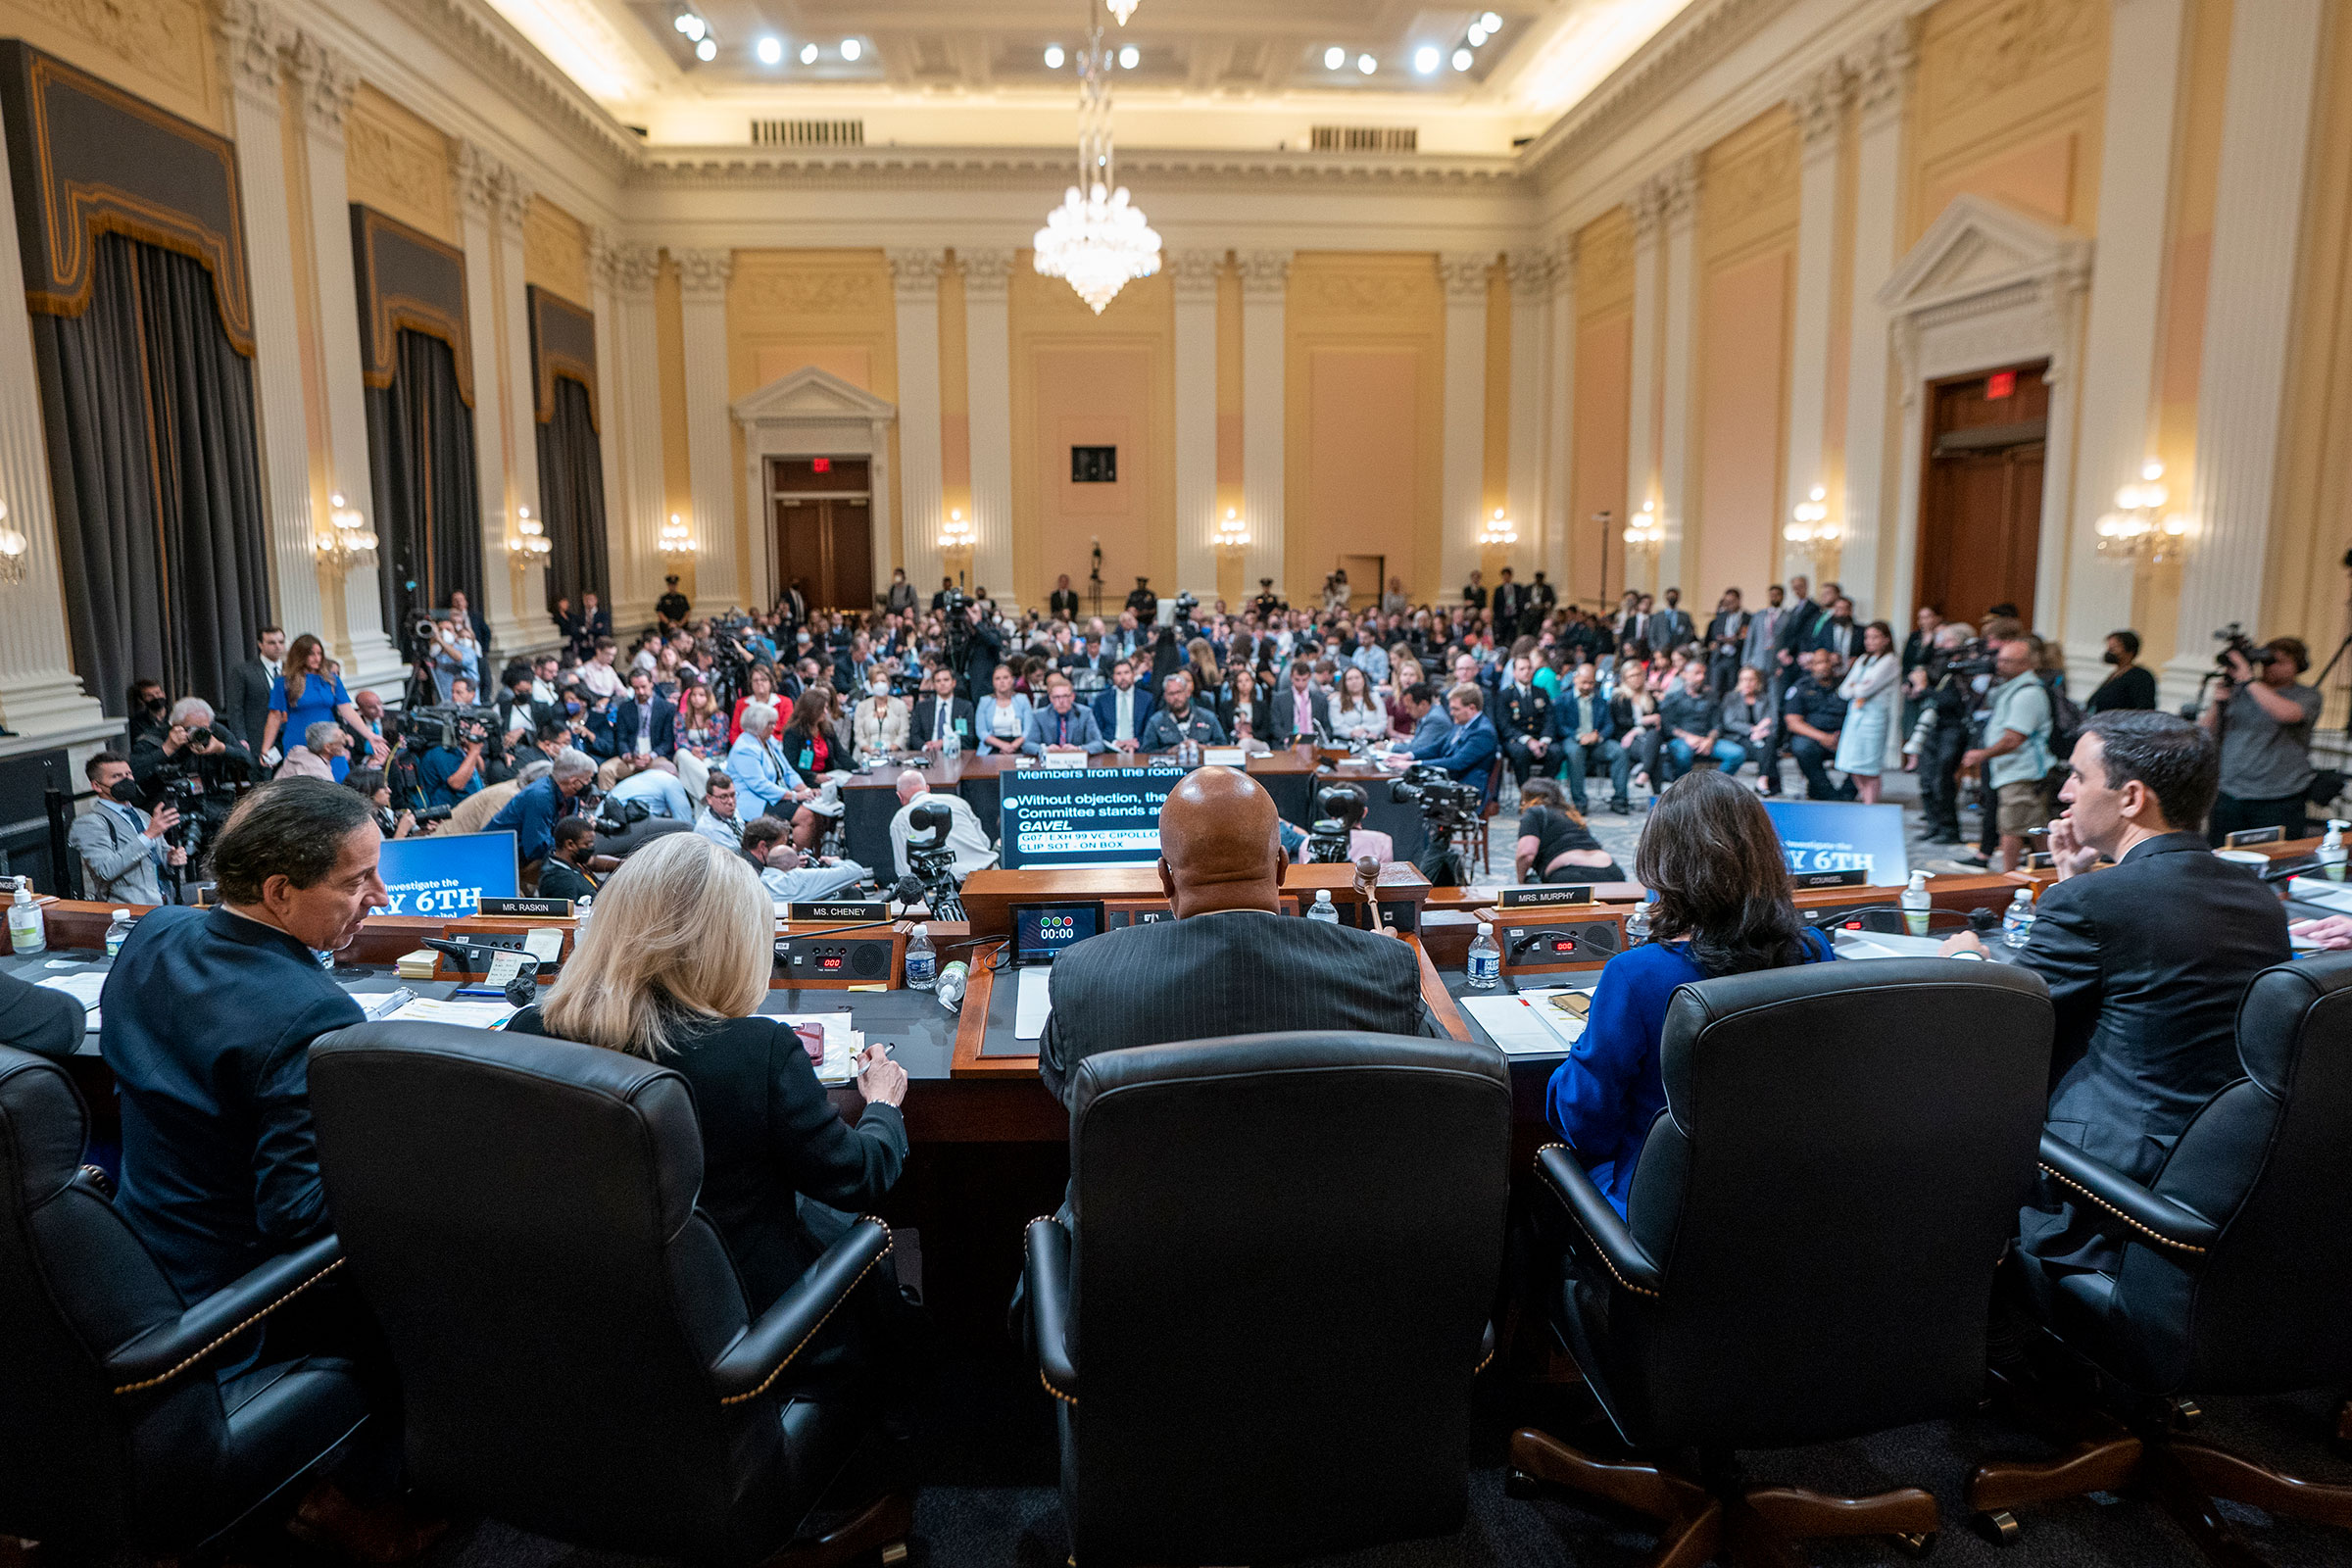 Rep. Bennie Thompson gavels closed the seventh hearing held by the Select Committee to Investigate the January 6th Attack on the U.S. Capitol on July 12, 2022. (Shawn Thew—Pool/Getty Images)